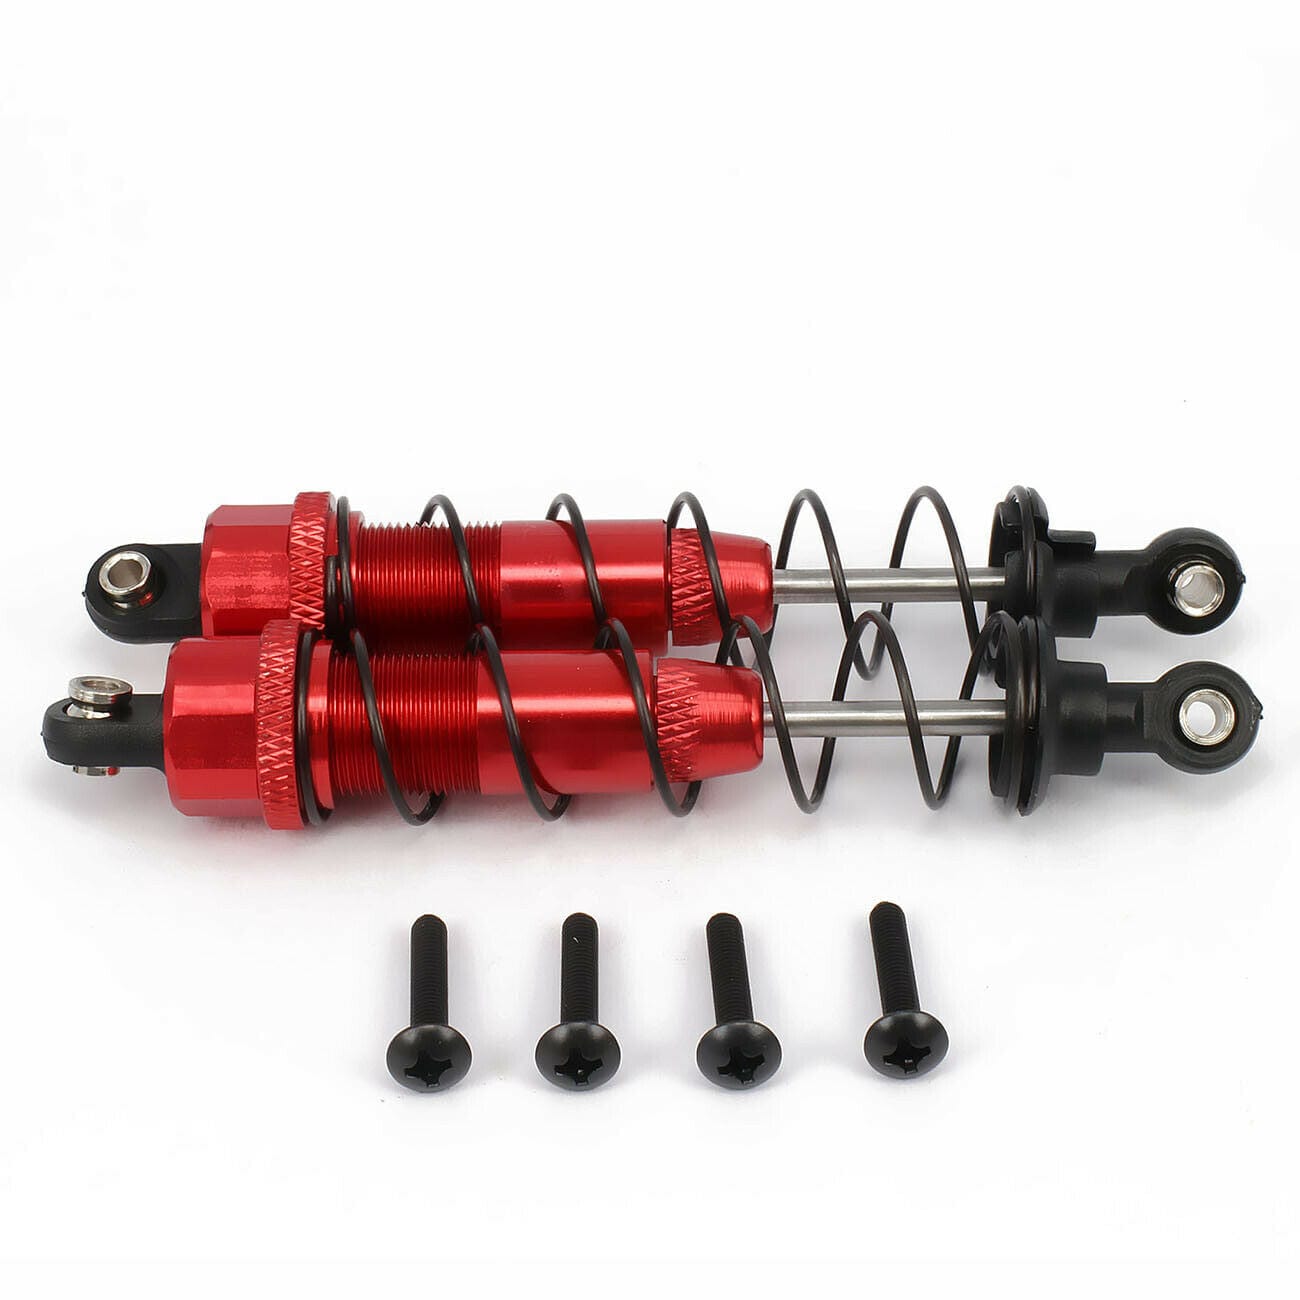 RCAWD AXIAL UPGRADE PARTS Red 100mm RC Shock Absorber Damper For Rc Model Car 1/10 Axial Scx10